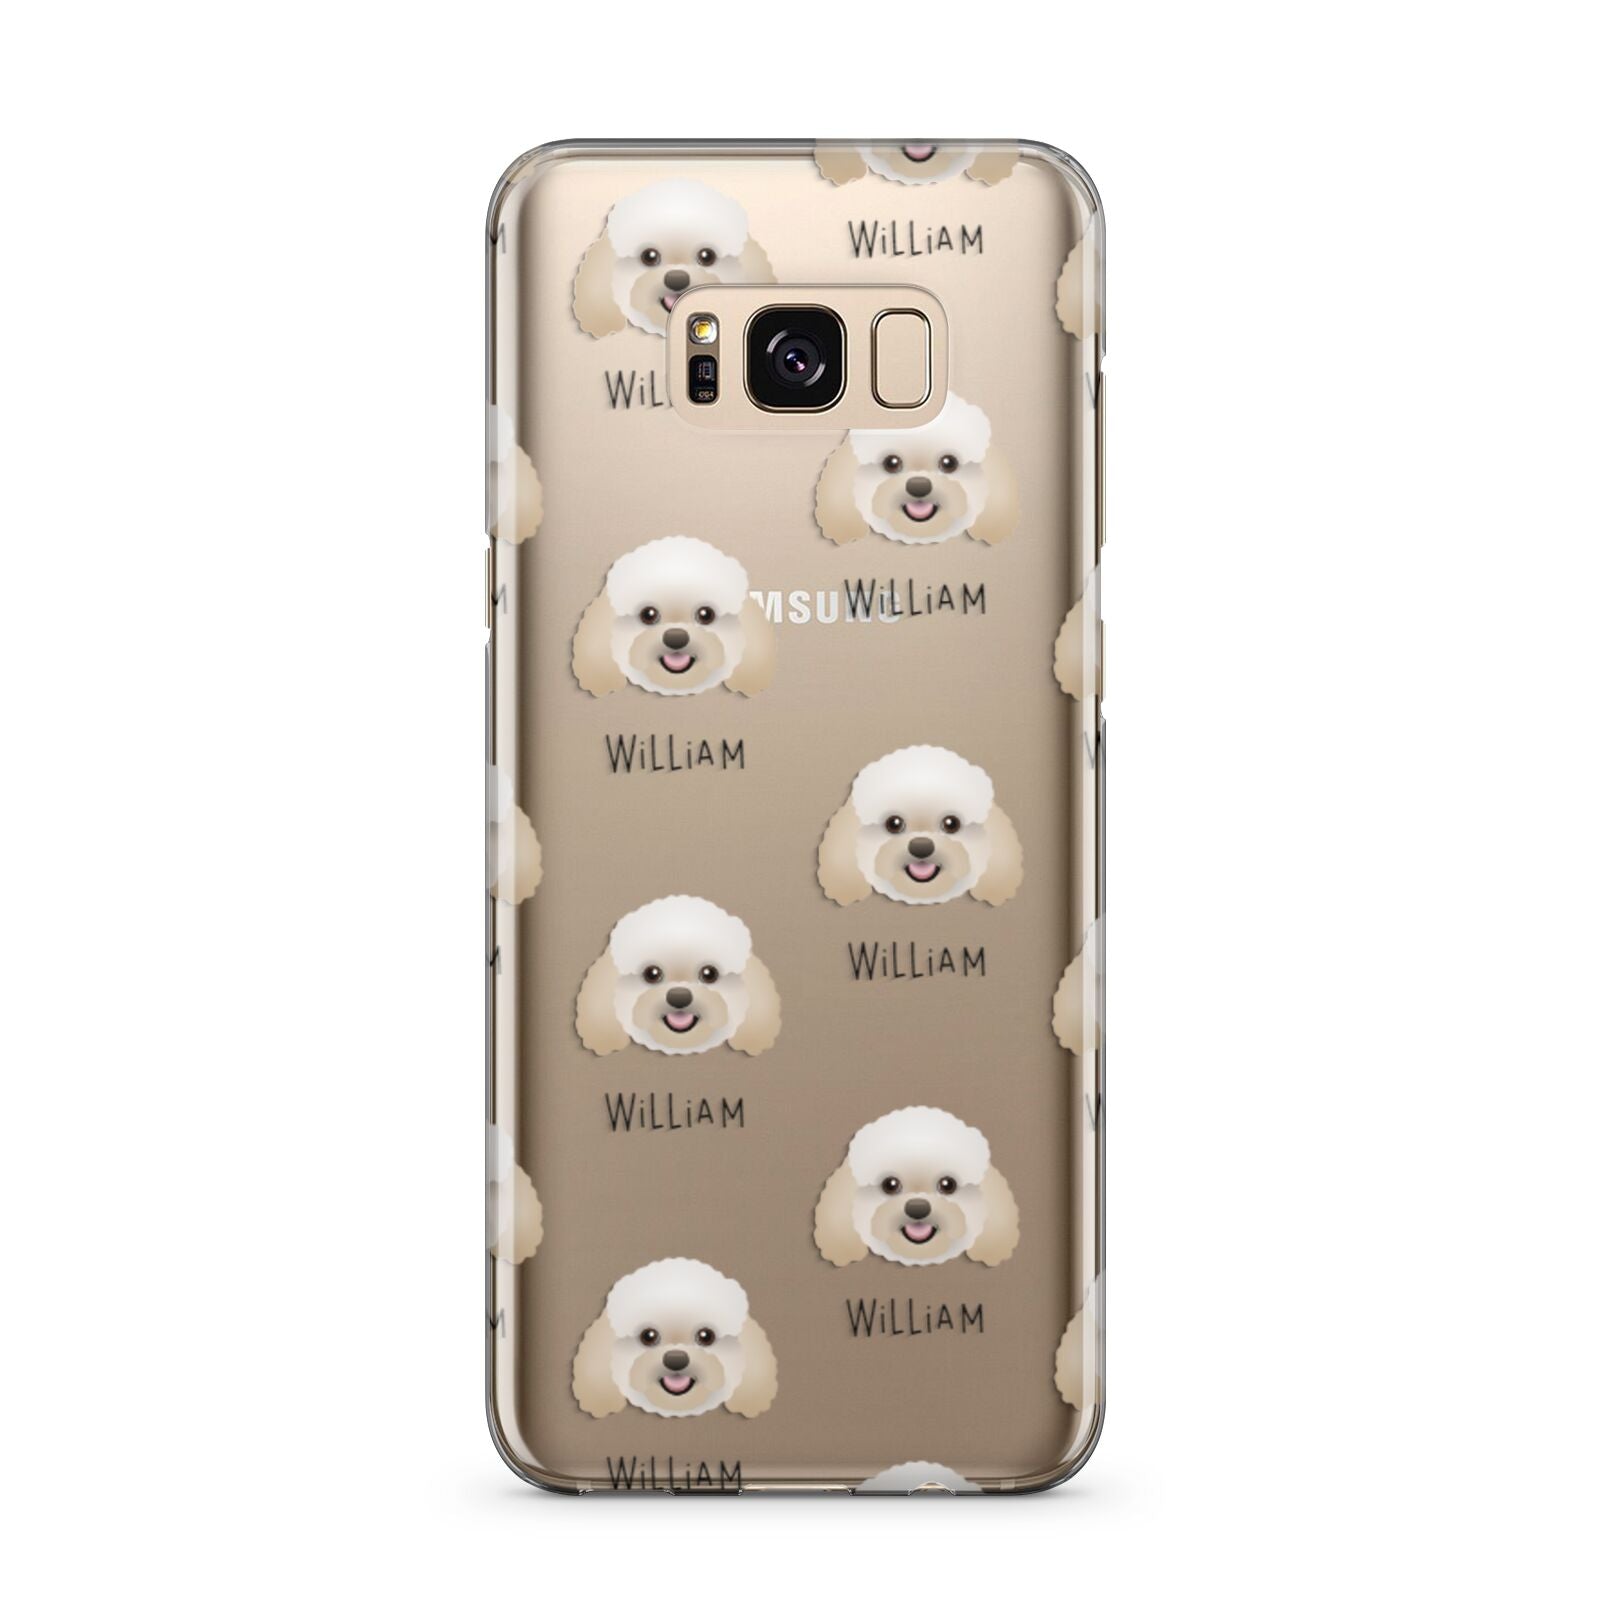 Bich poo Icon with Name Samsung Galaxy S8 Plus Case